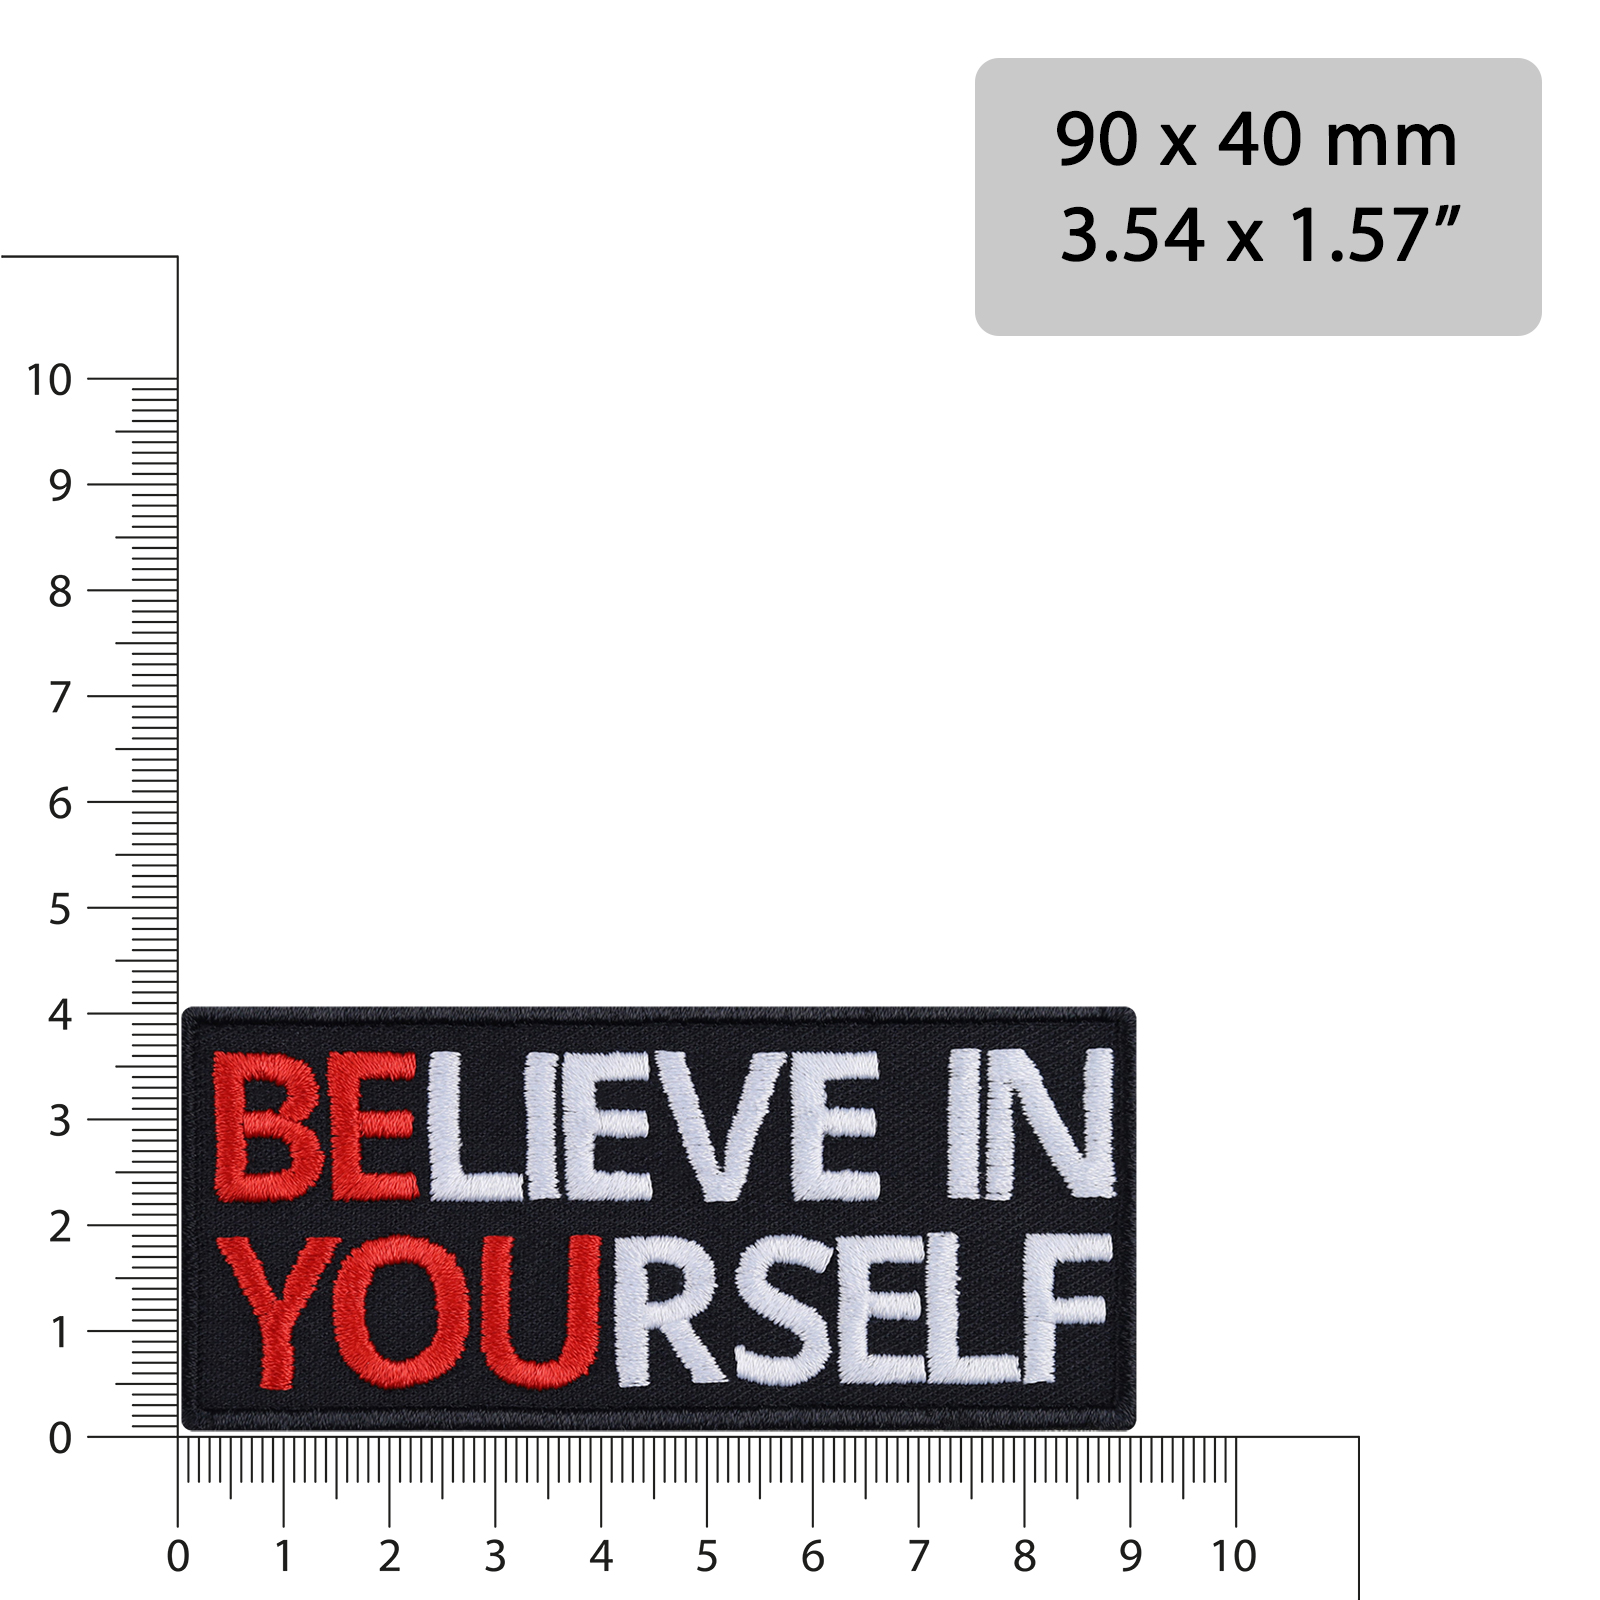 Believe in yourself - Patch